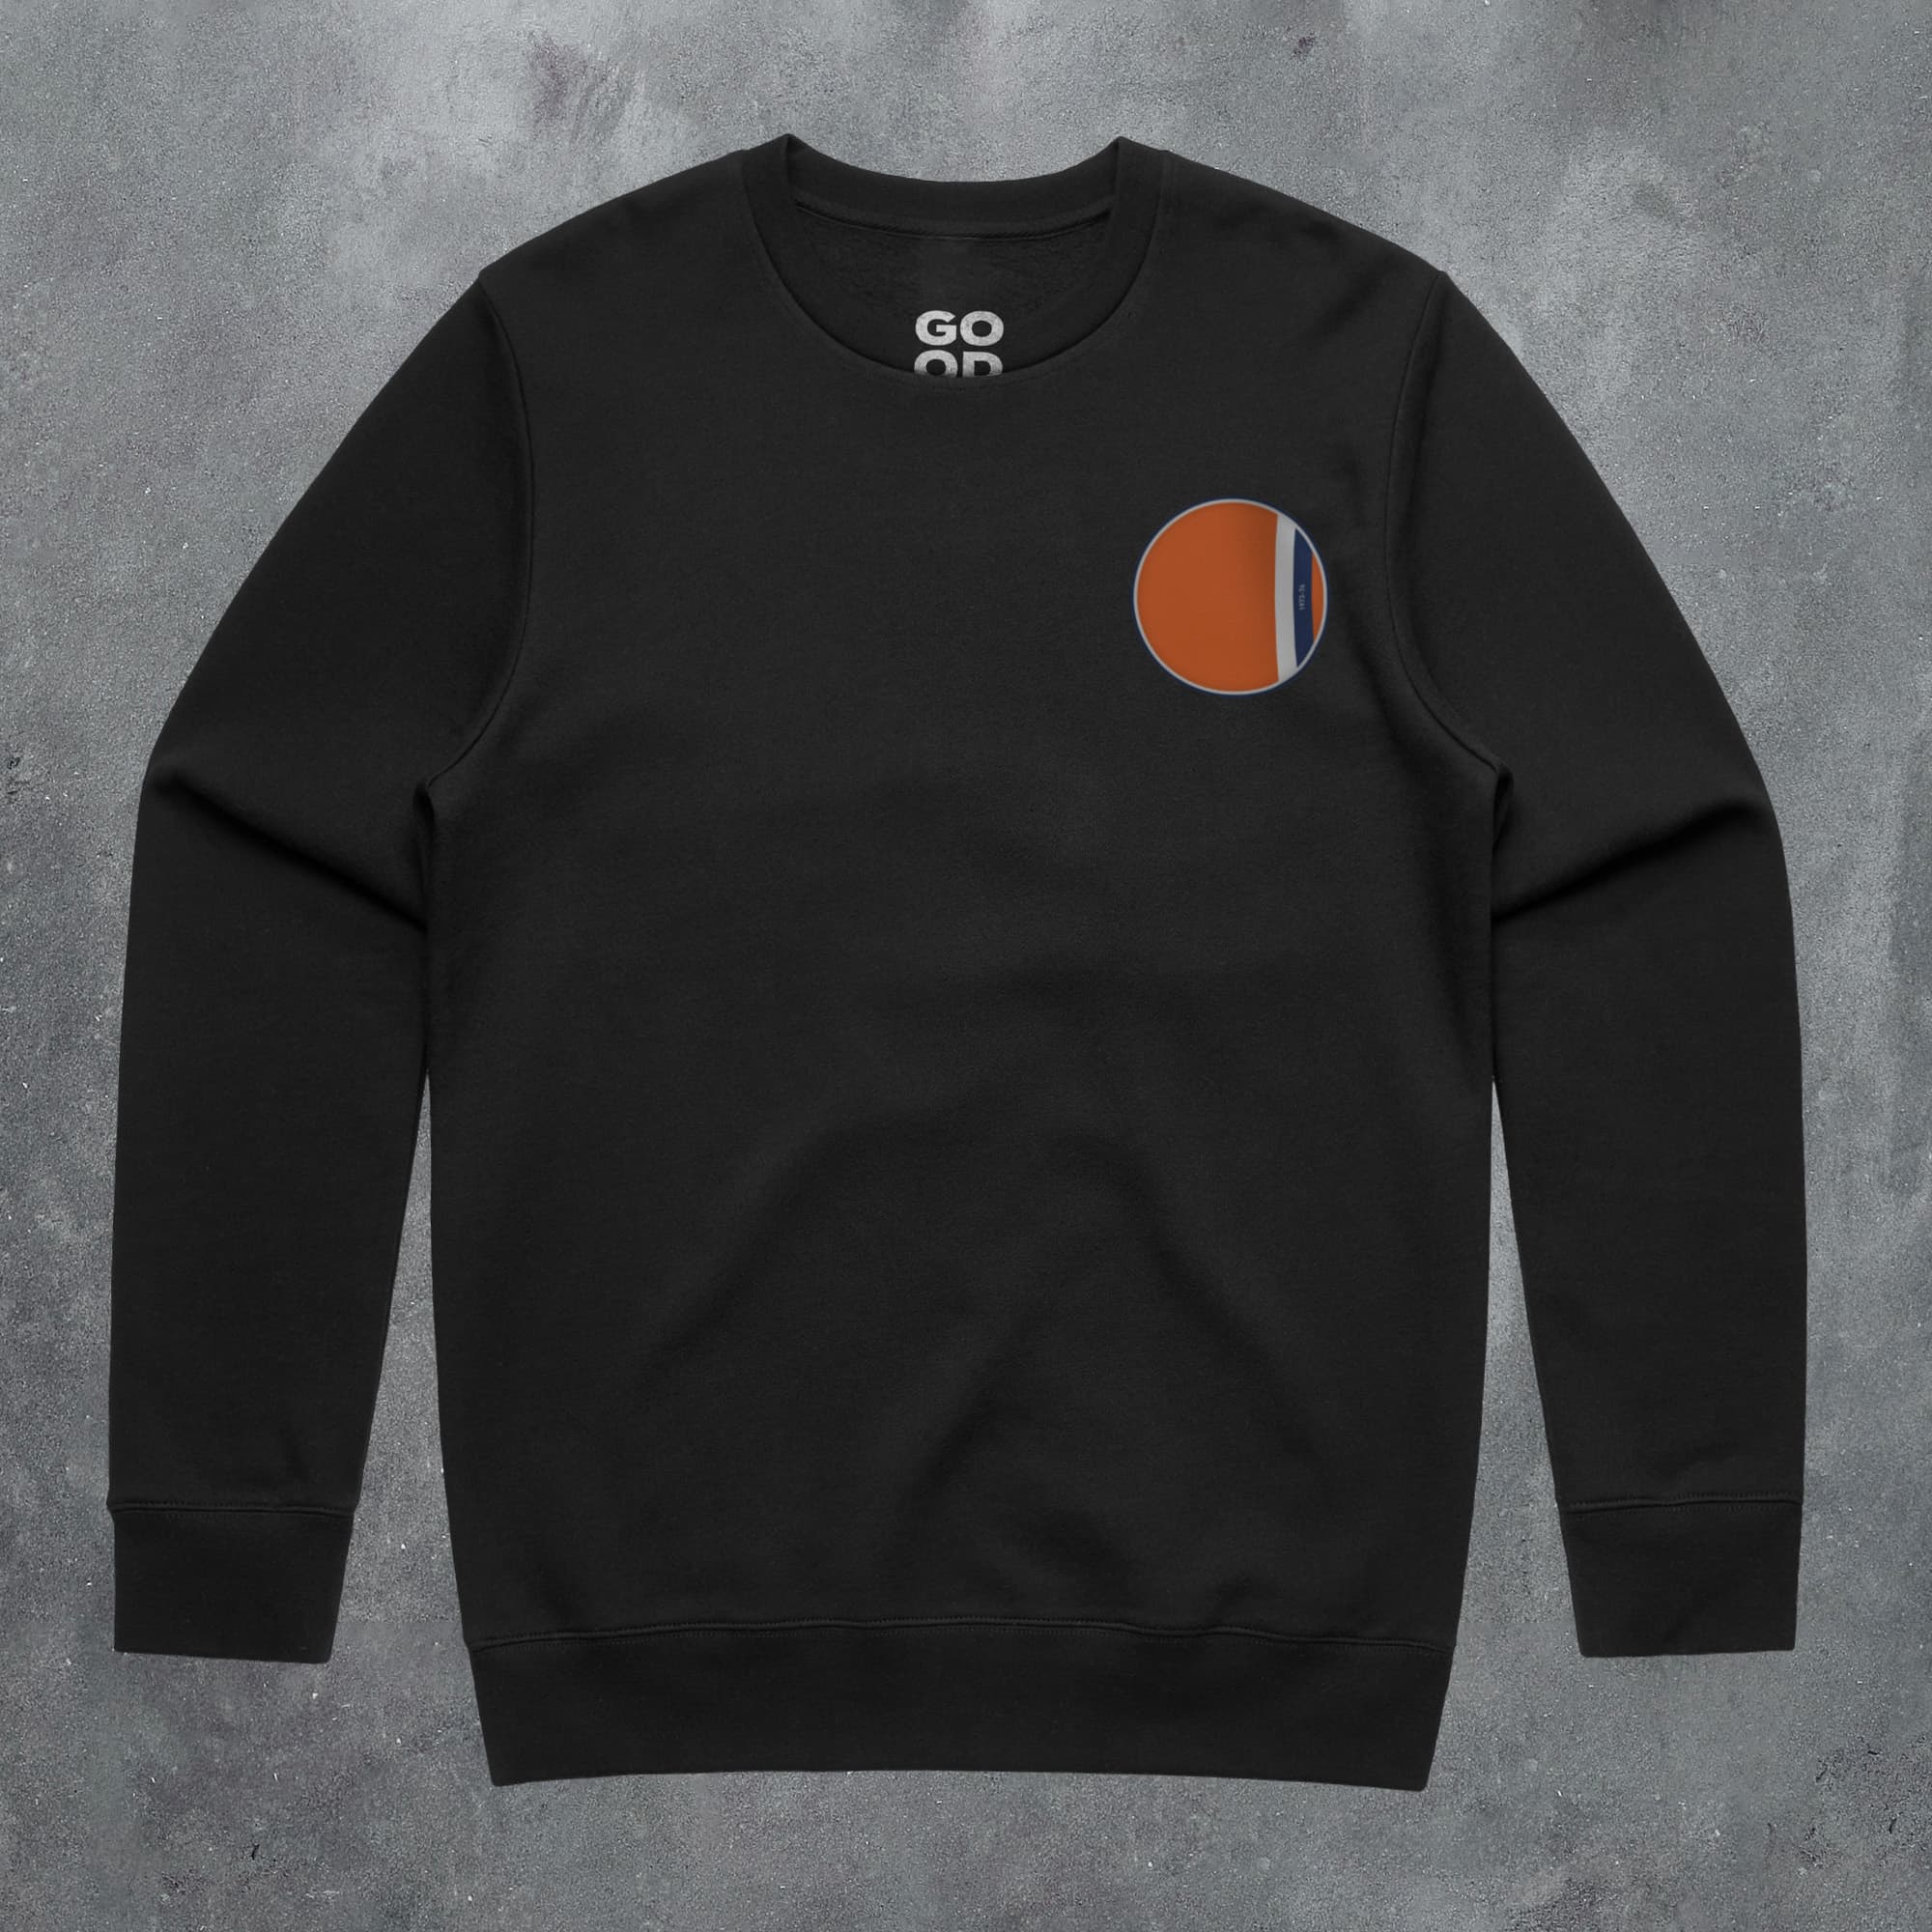 a black sweatshirt with an orange and blue circle on it